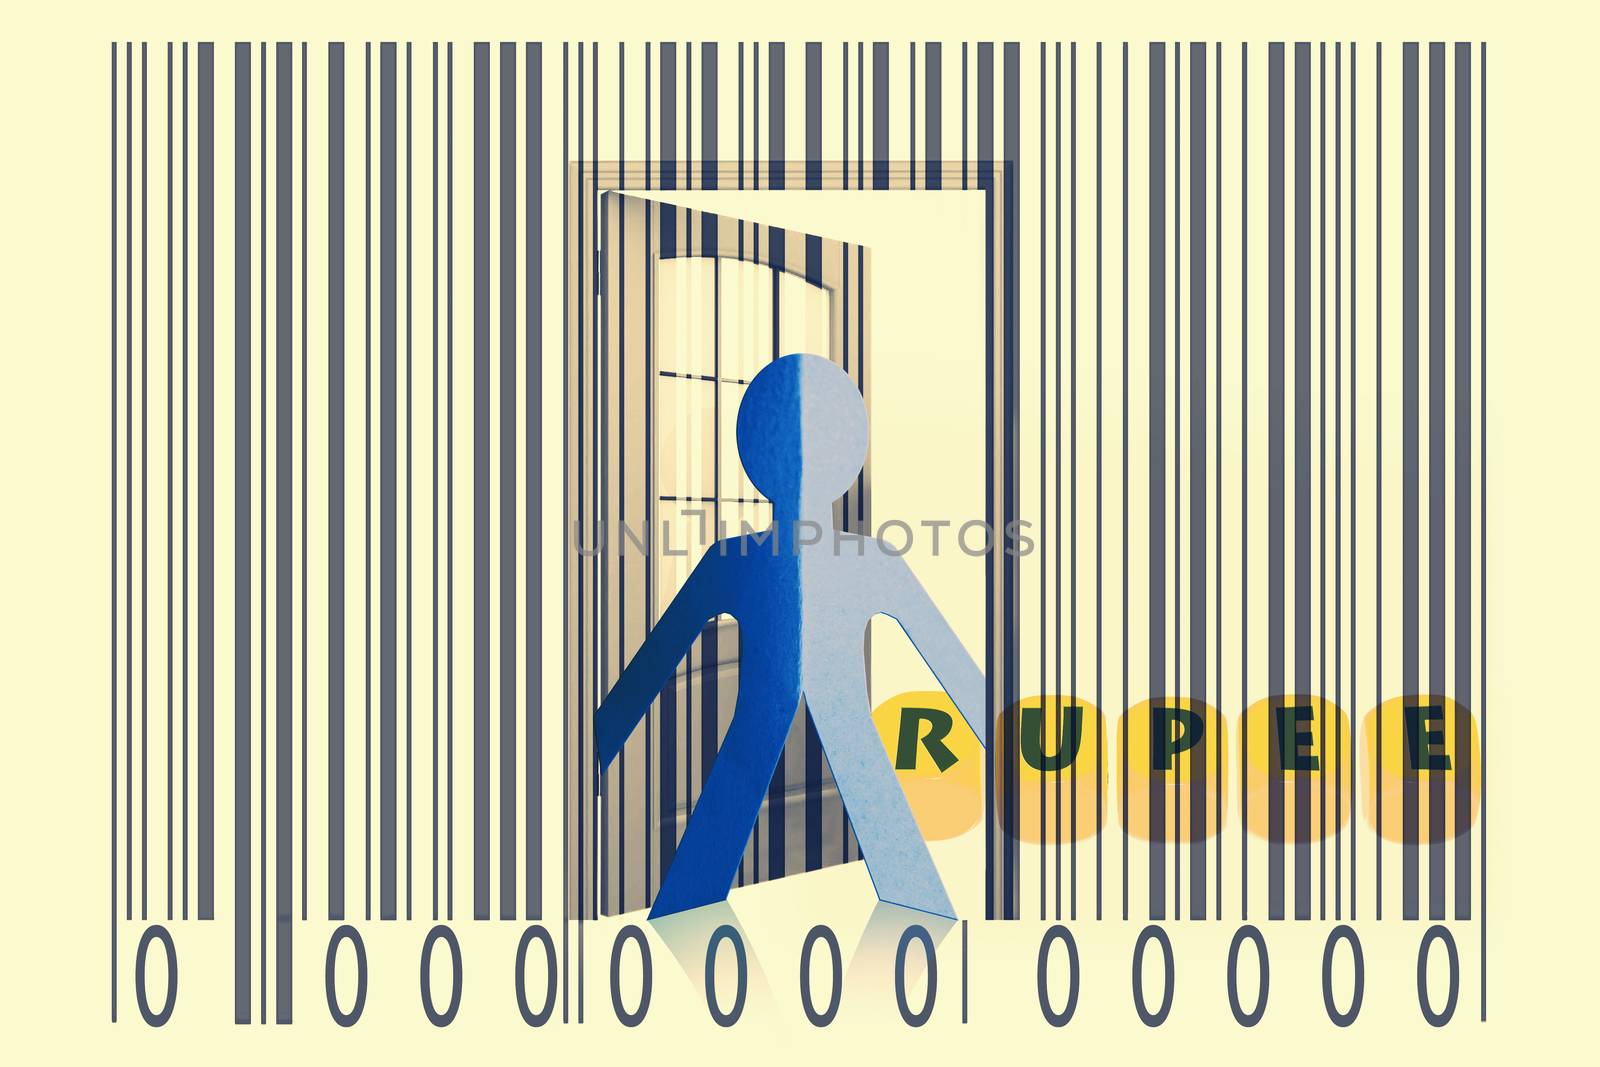 Paperman coming out of a bar code with Rupee word